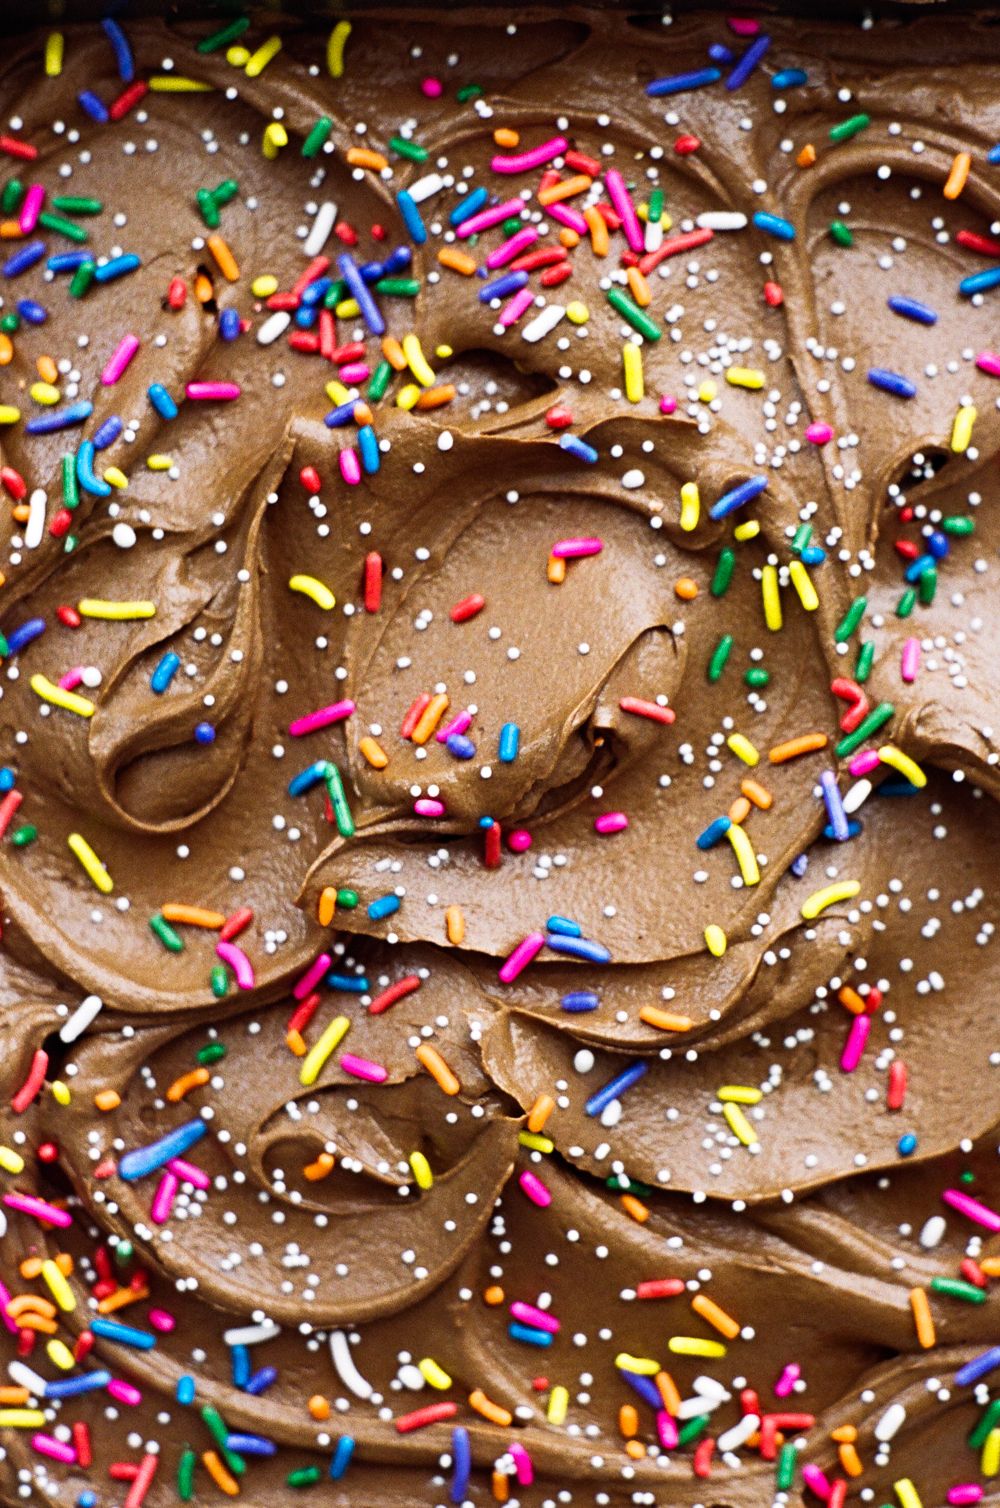 A close up of a chocolate cake with chocolate frosting and sprinkles. - Cake